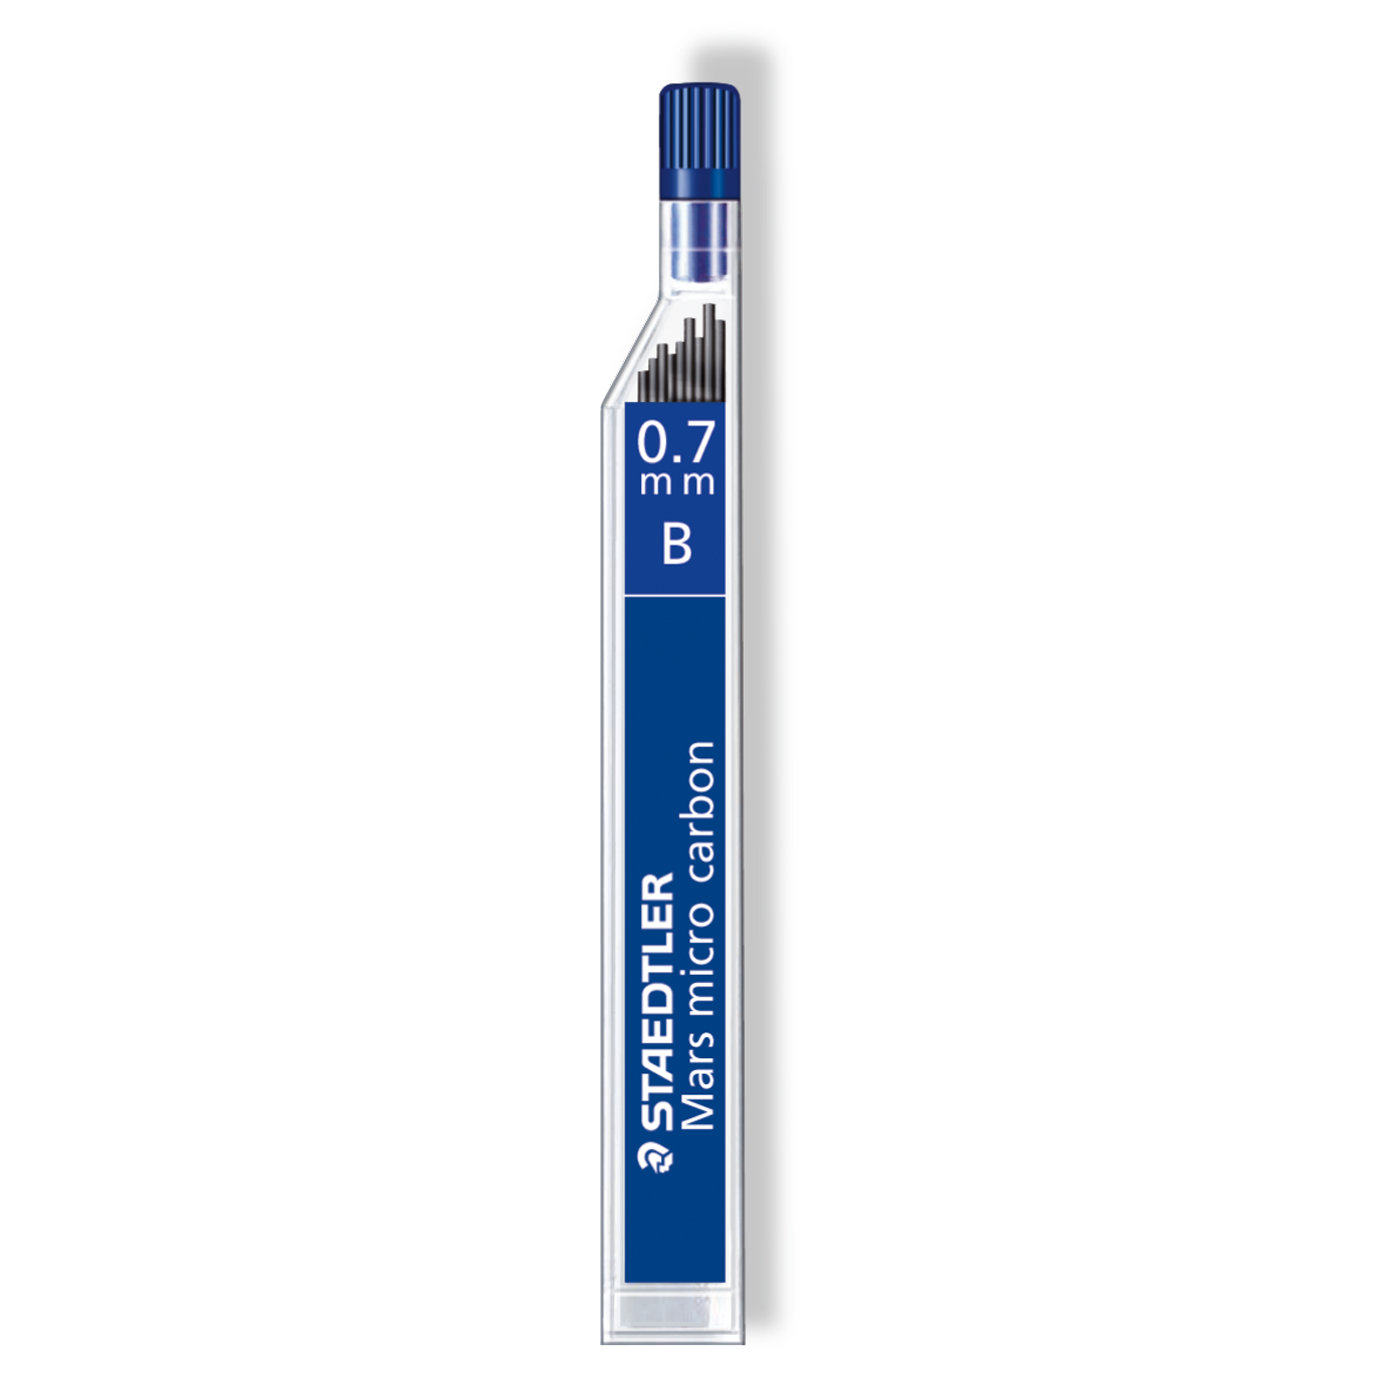 Staedtler Mechanical Pencil Leads 0.7 mm Mars Micro Refill Tube of 12 B